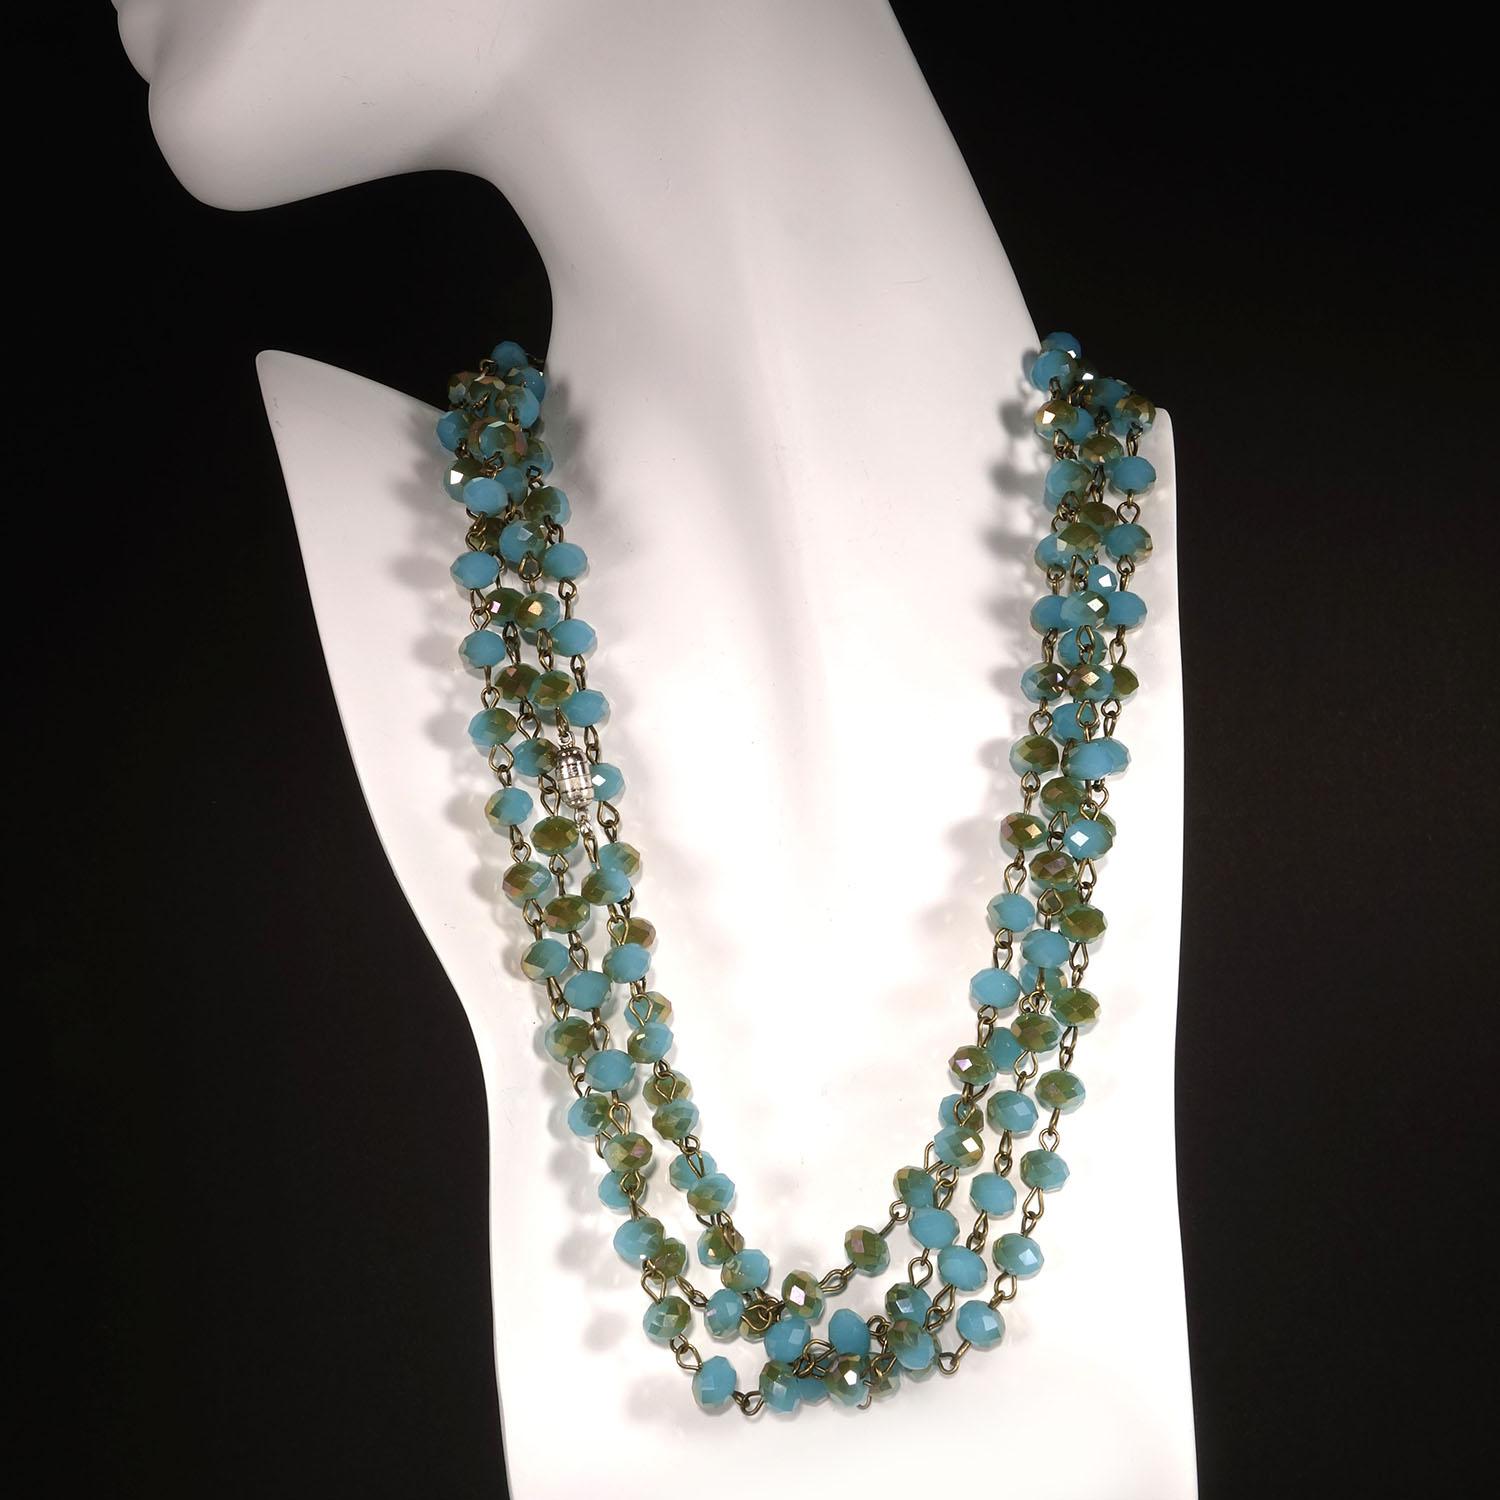 Artisan AJD Teal / Bronzy Crystal Bead Necklace  Great Gift! For Sale